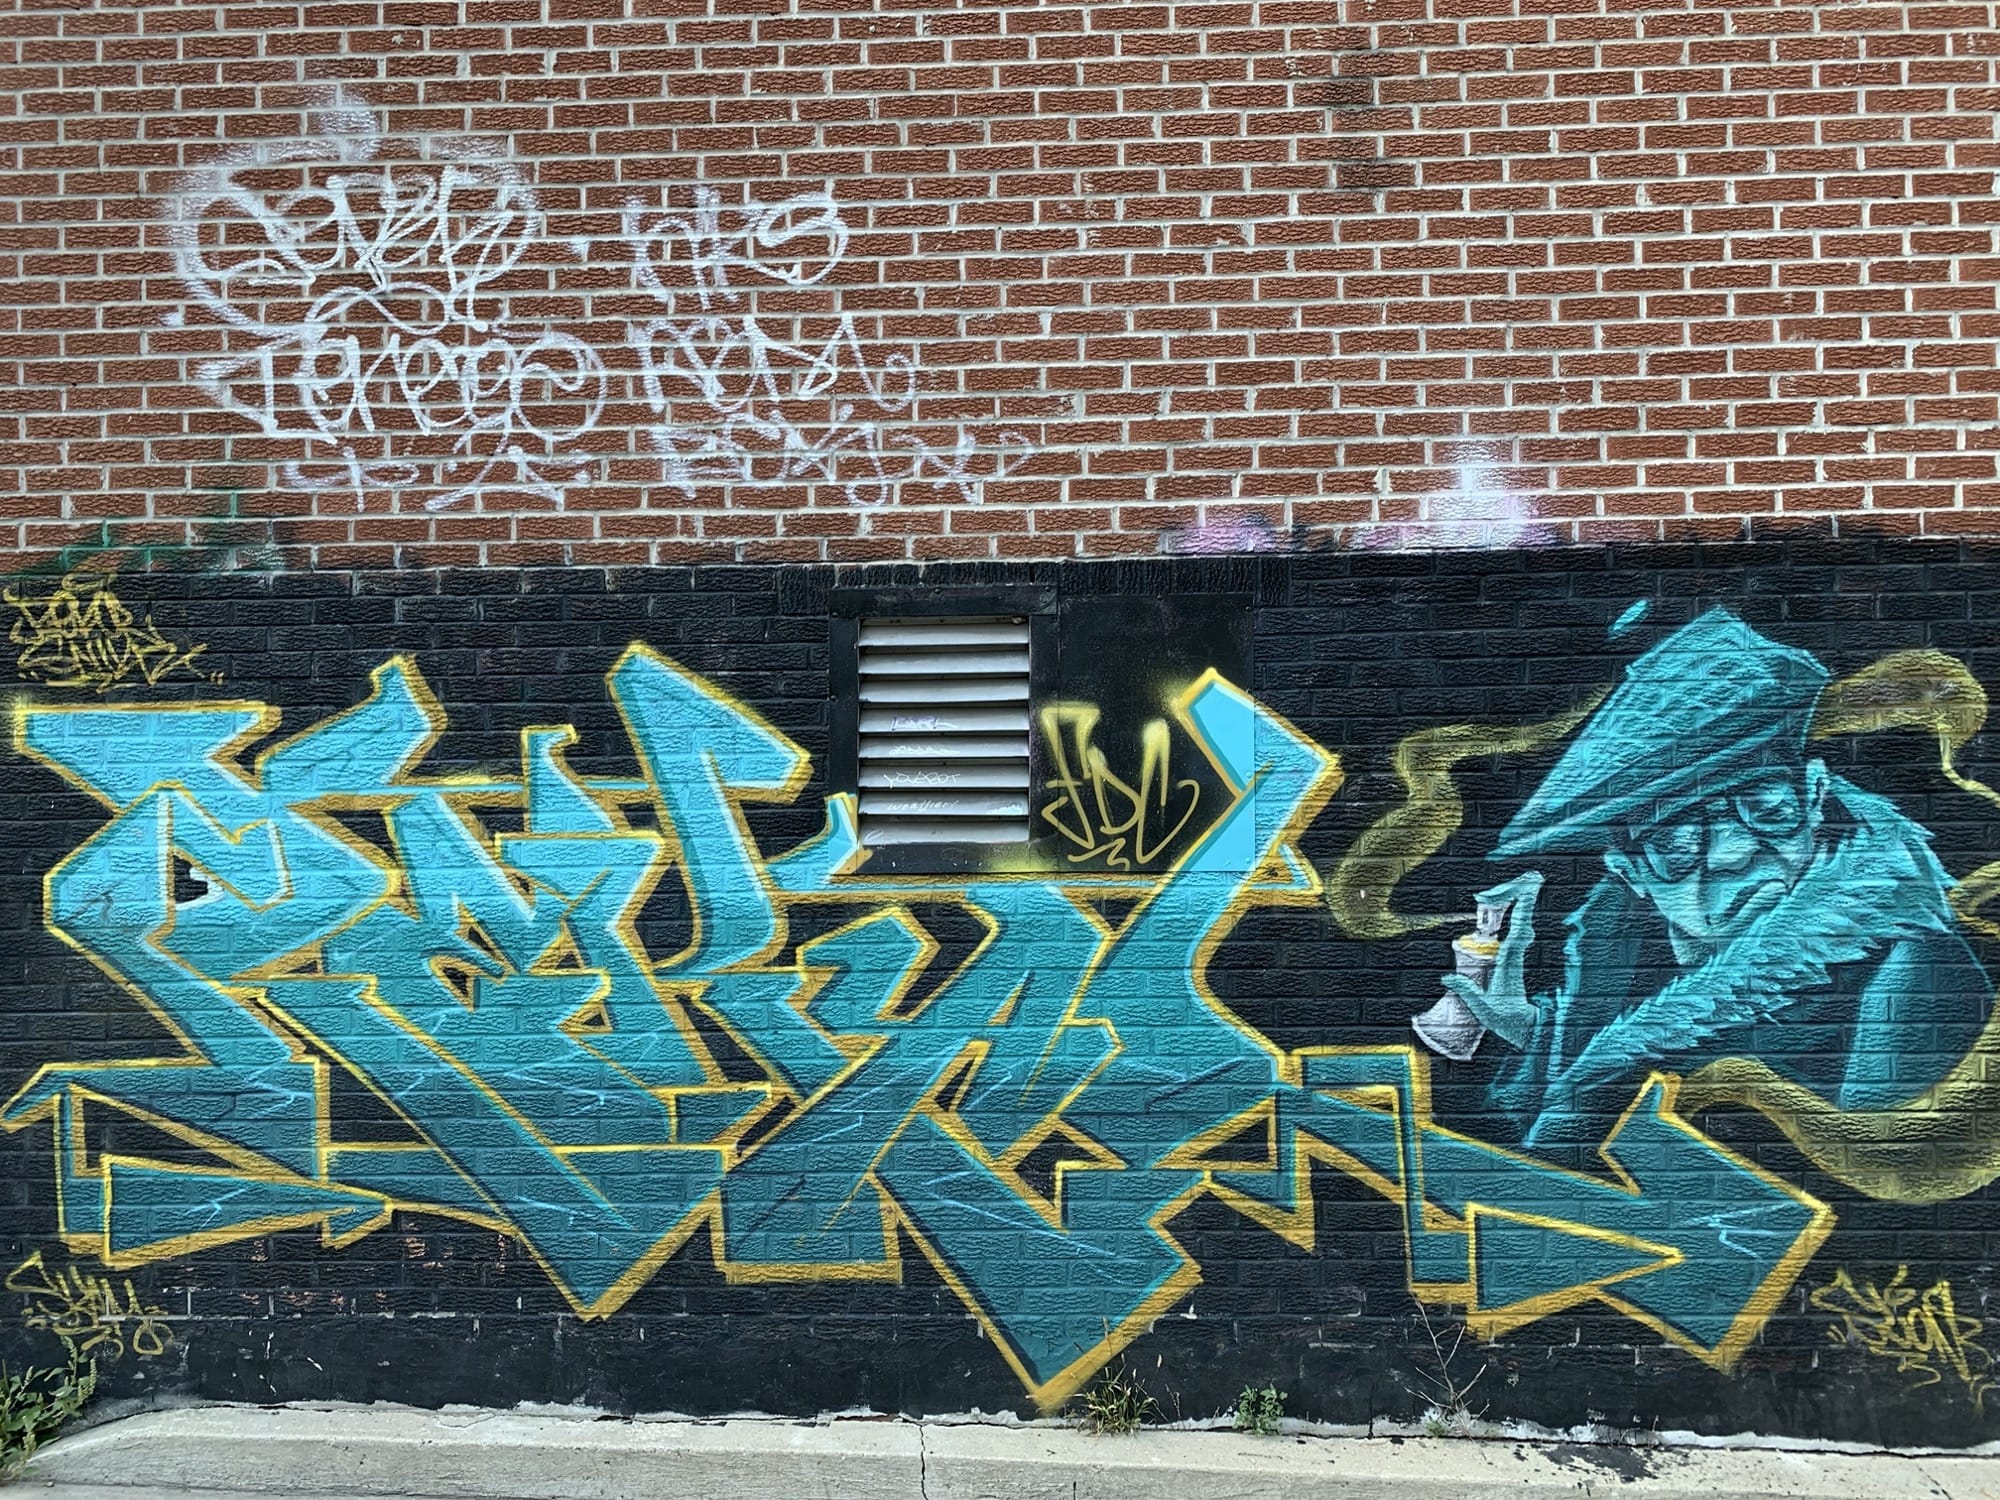 Graffiti 2392  captured by Rabot in Toronto Canada